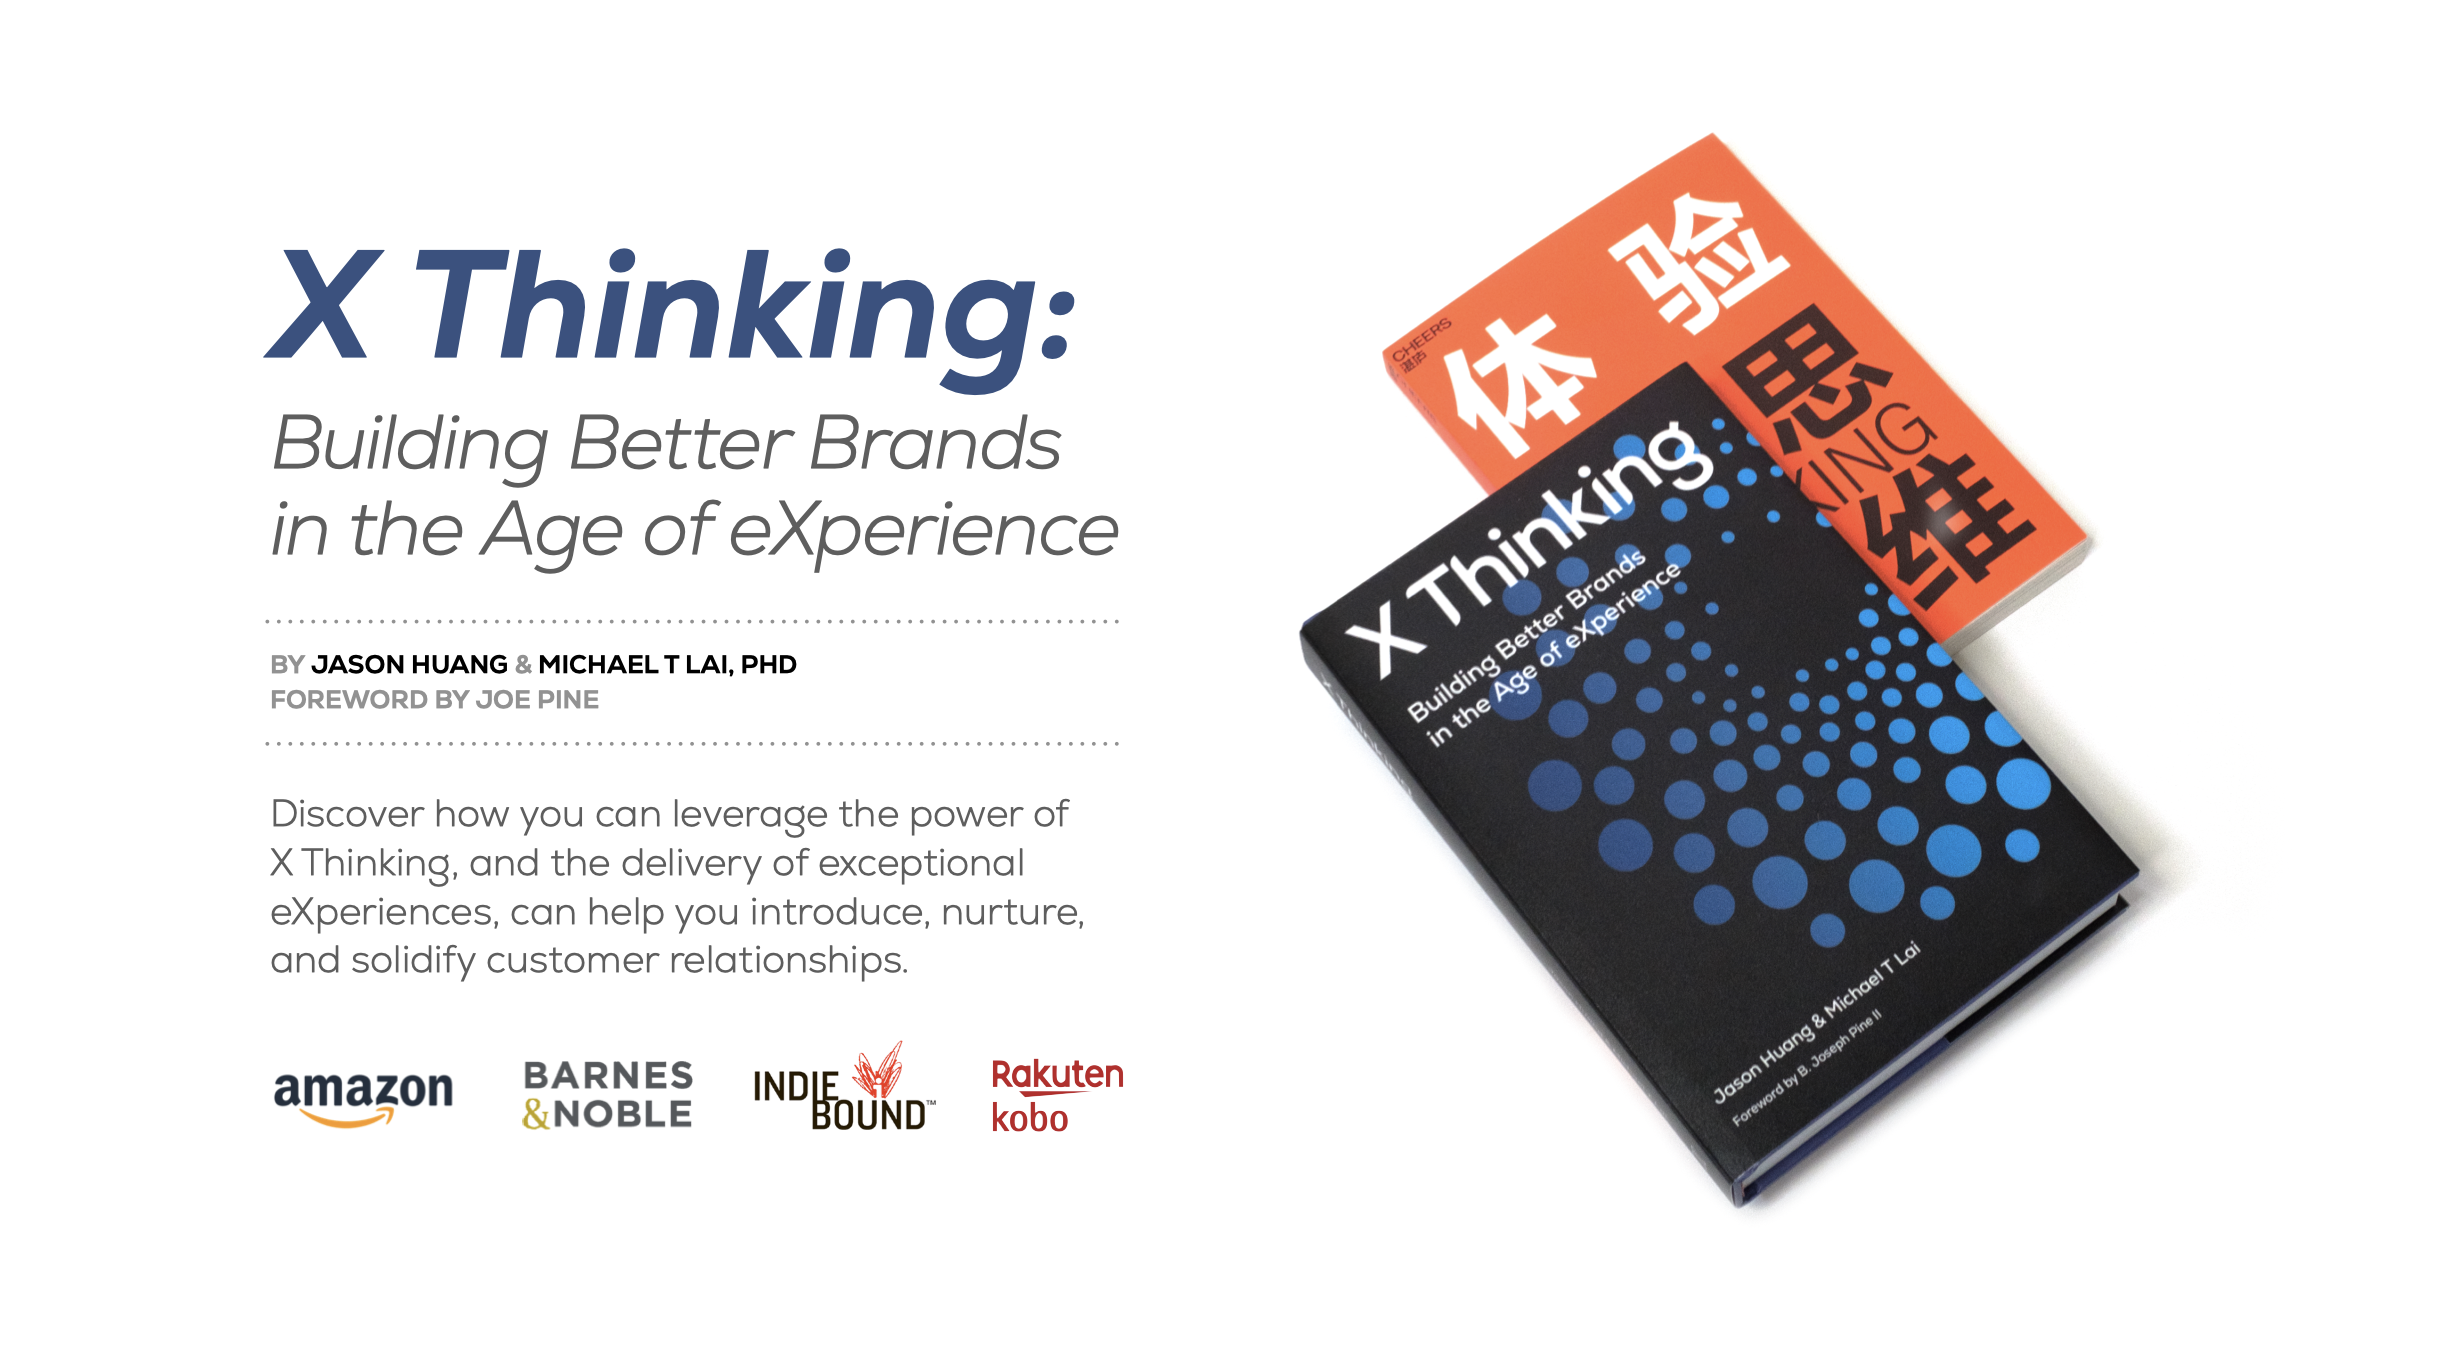 English adaptation of X Thinking brings Chinese insights and perspective on the Experience Economy to the world